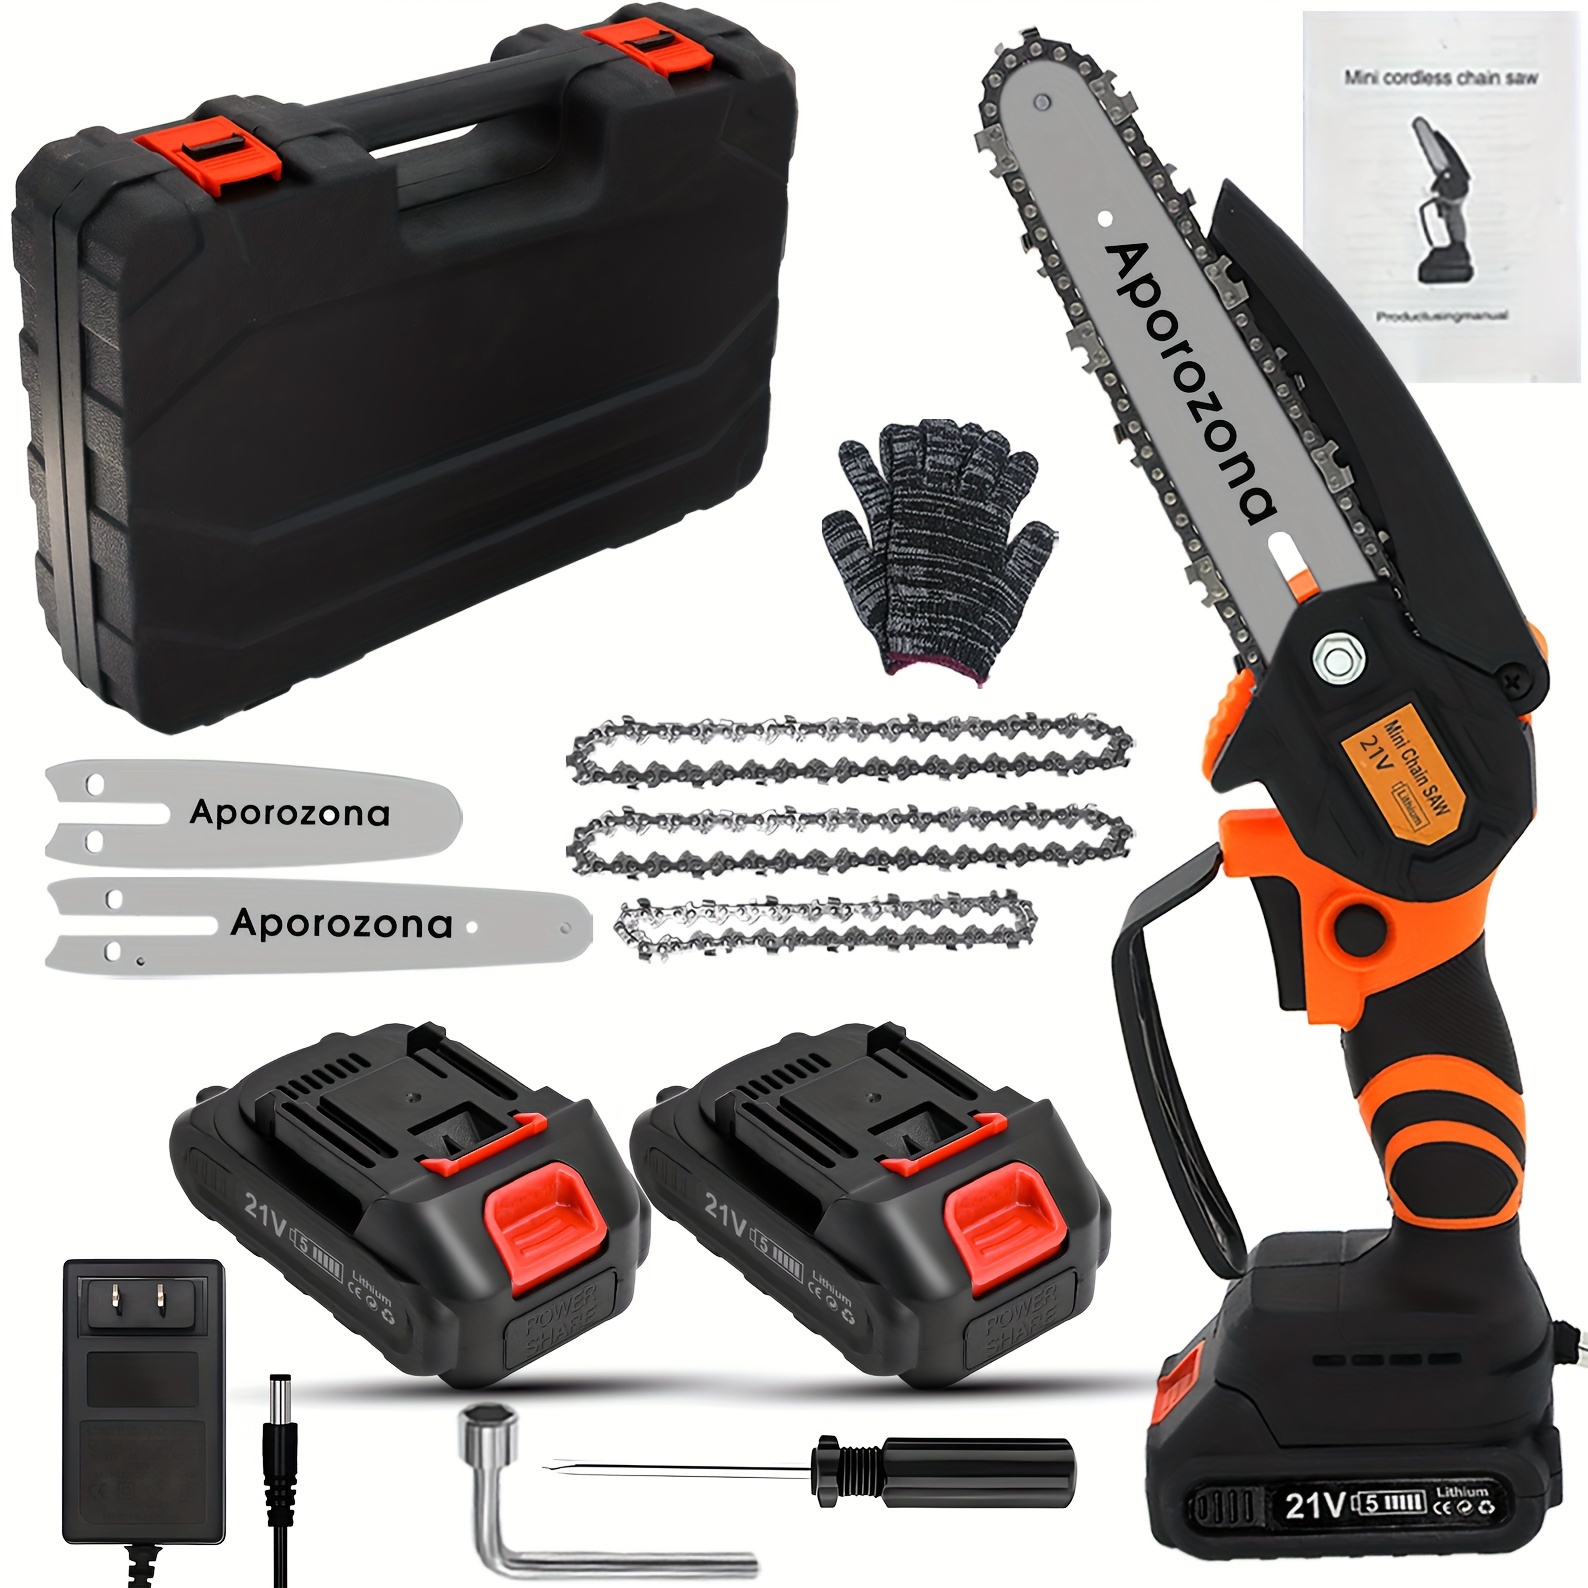 

1set Mini Chainsaw Cordless 6 Inch [gardener Friendly] Super Handheld Rechargeable Chain Saw With Upgraded 3 Chains 2 Piece 21v Batteries, Small Battery Powered For Wood/trees Cutting